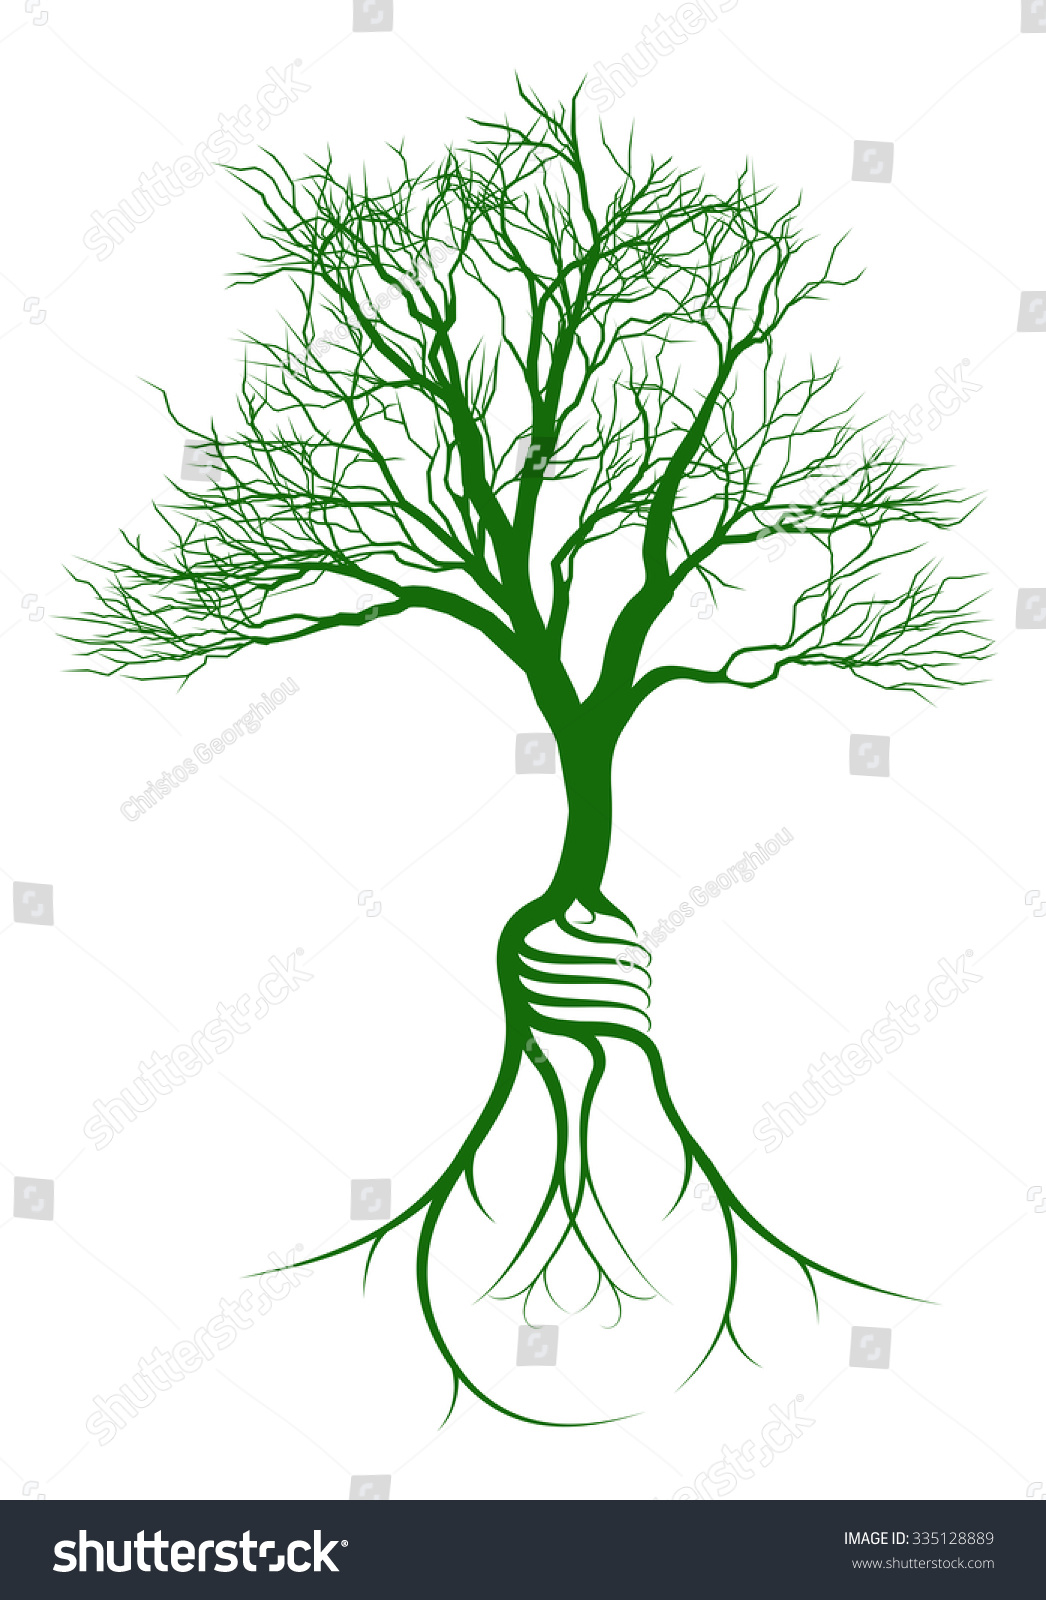 growing tree clipart - photo #27